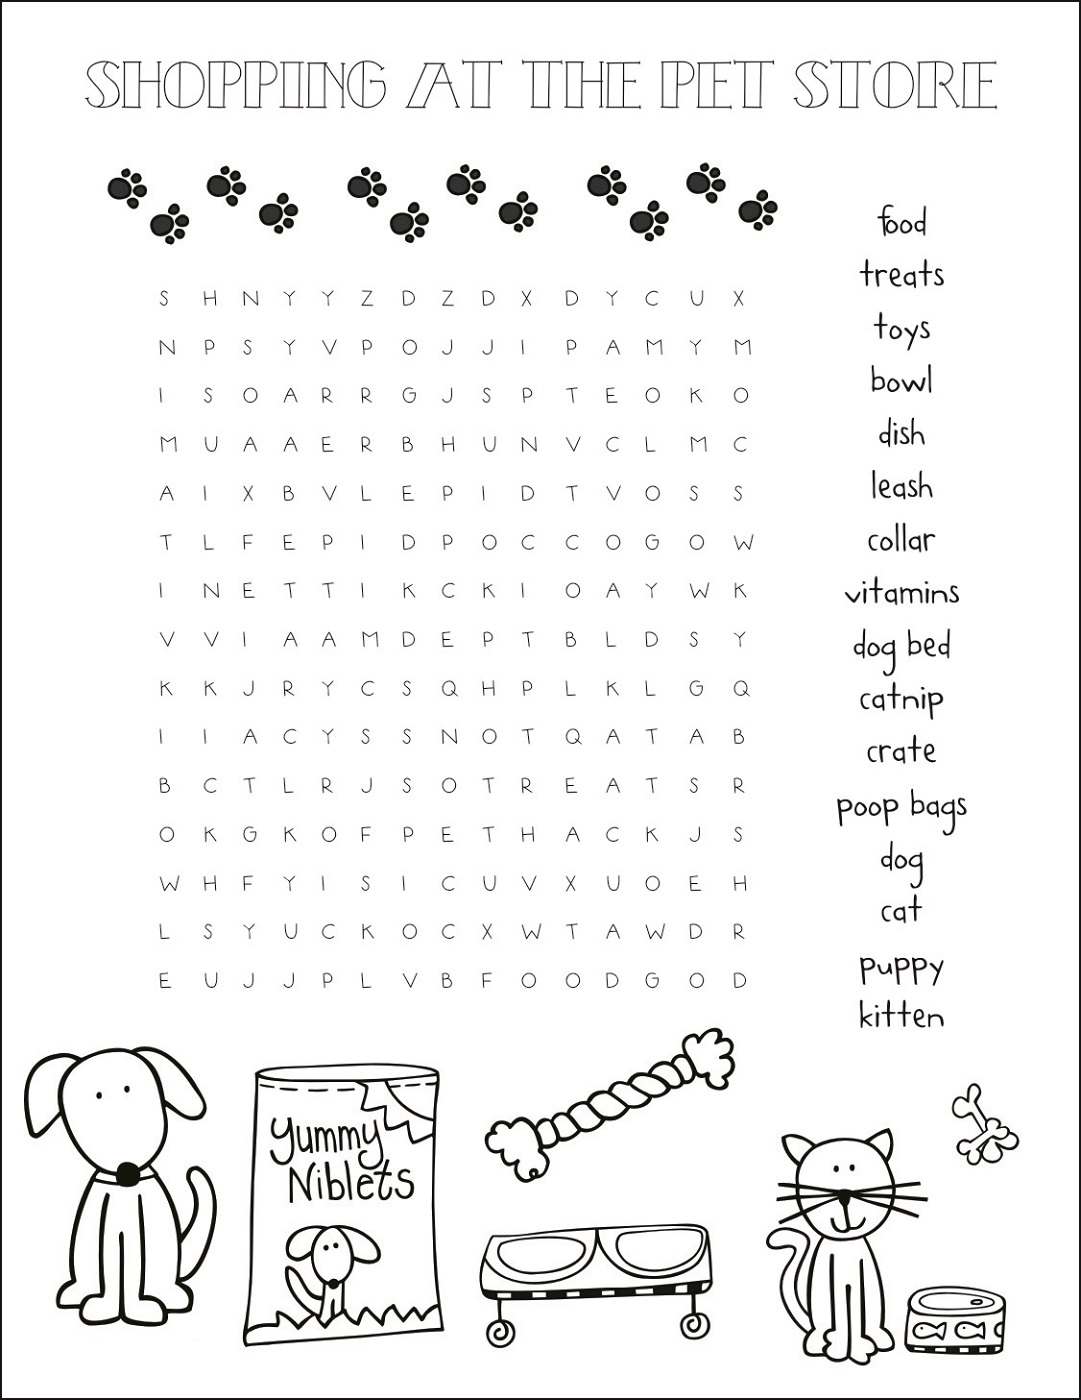 pet-word-search-store